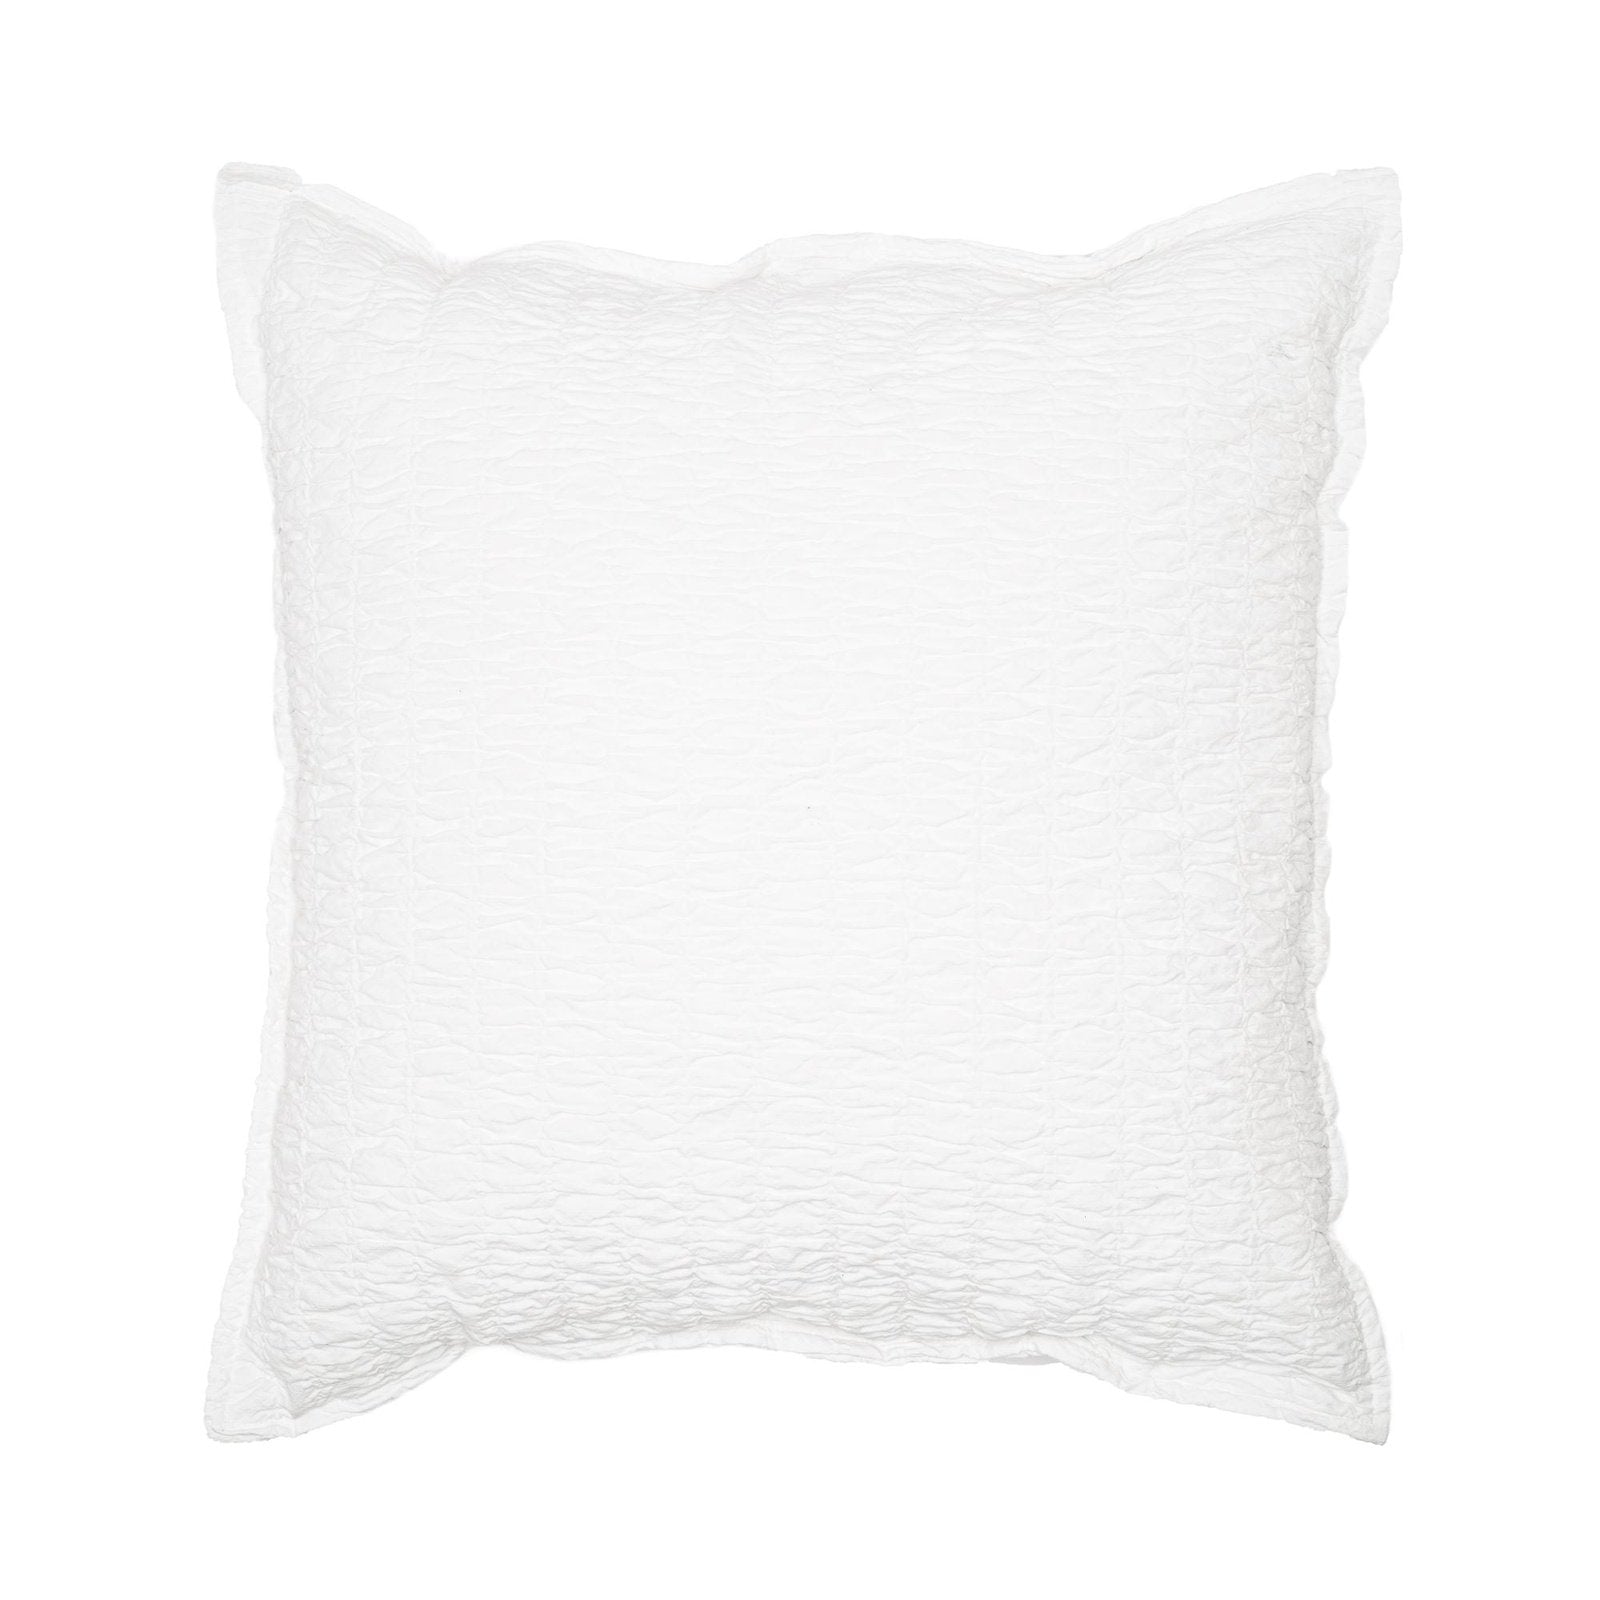 The Ada pillow cover is a matching cover to the Ada bed cover. This high quality 100% stone washed jacquard cotton cushion cover has an hiding zipper on the back.